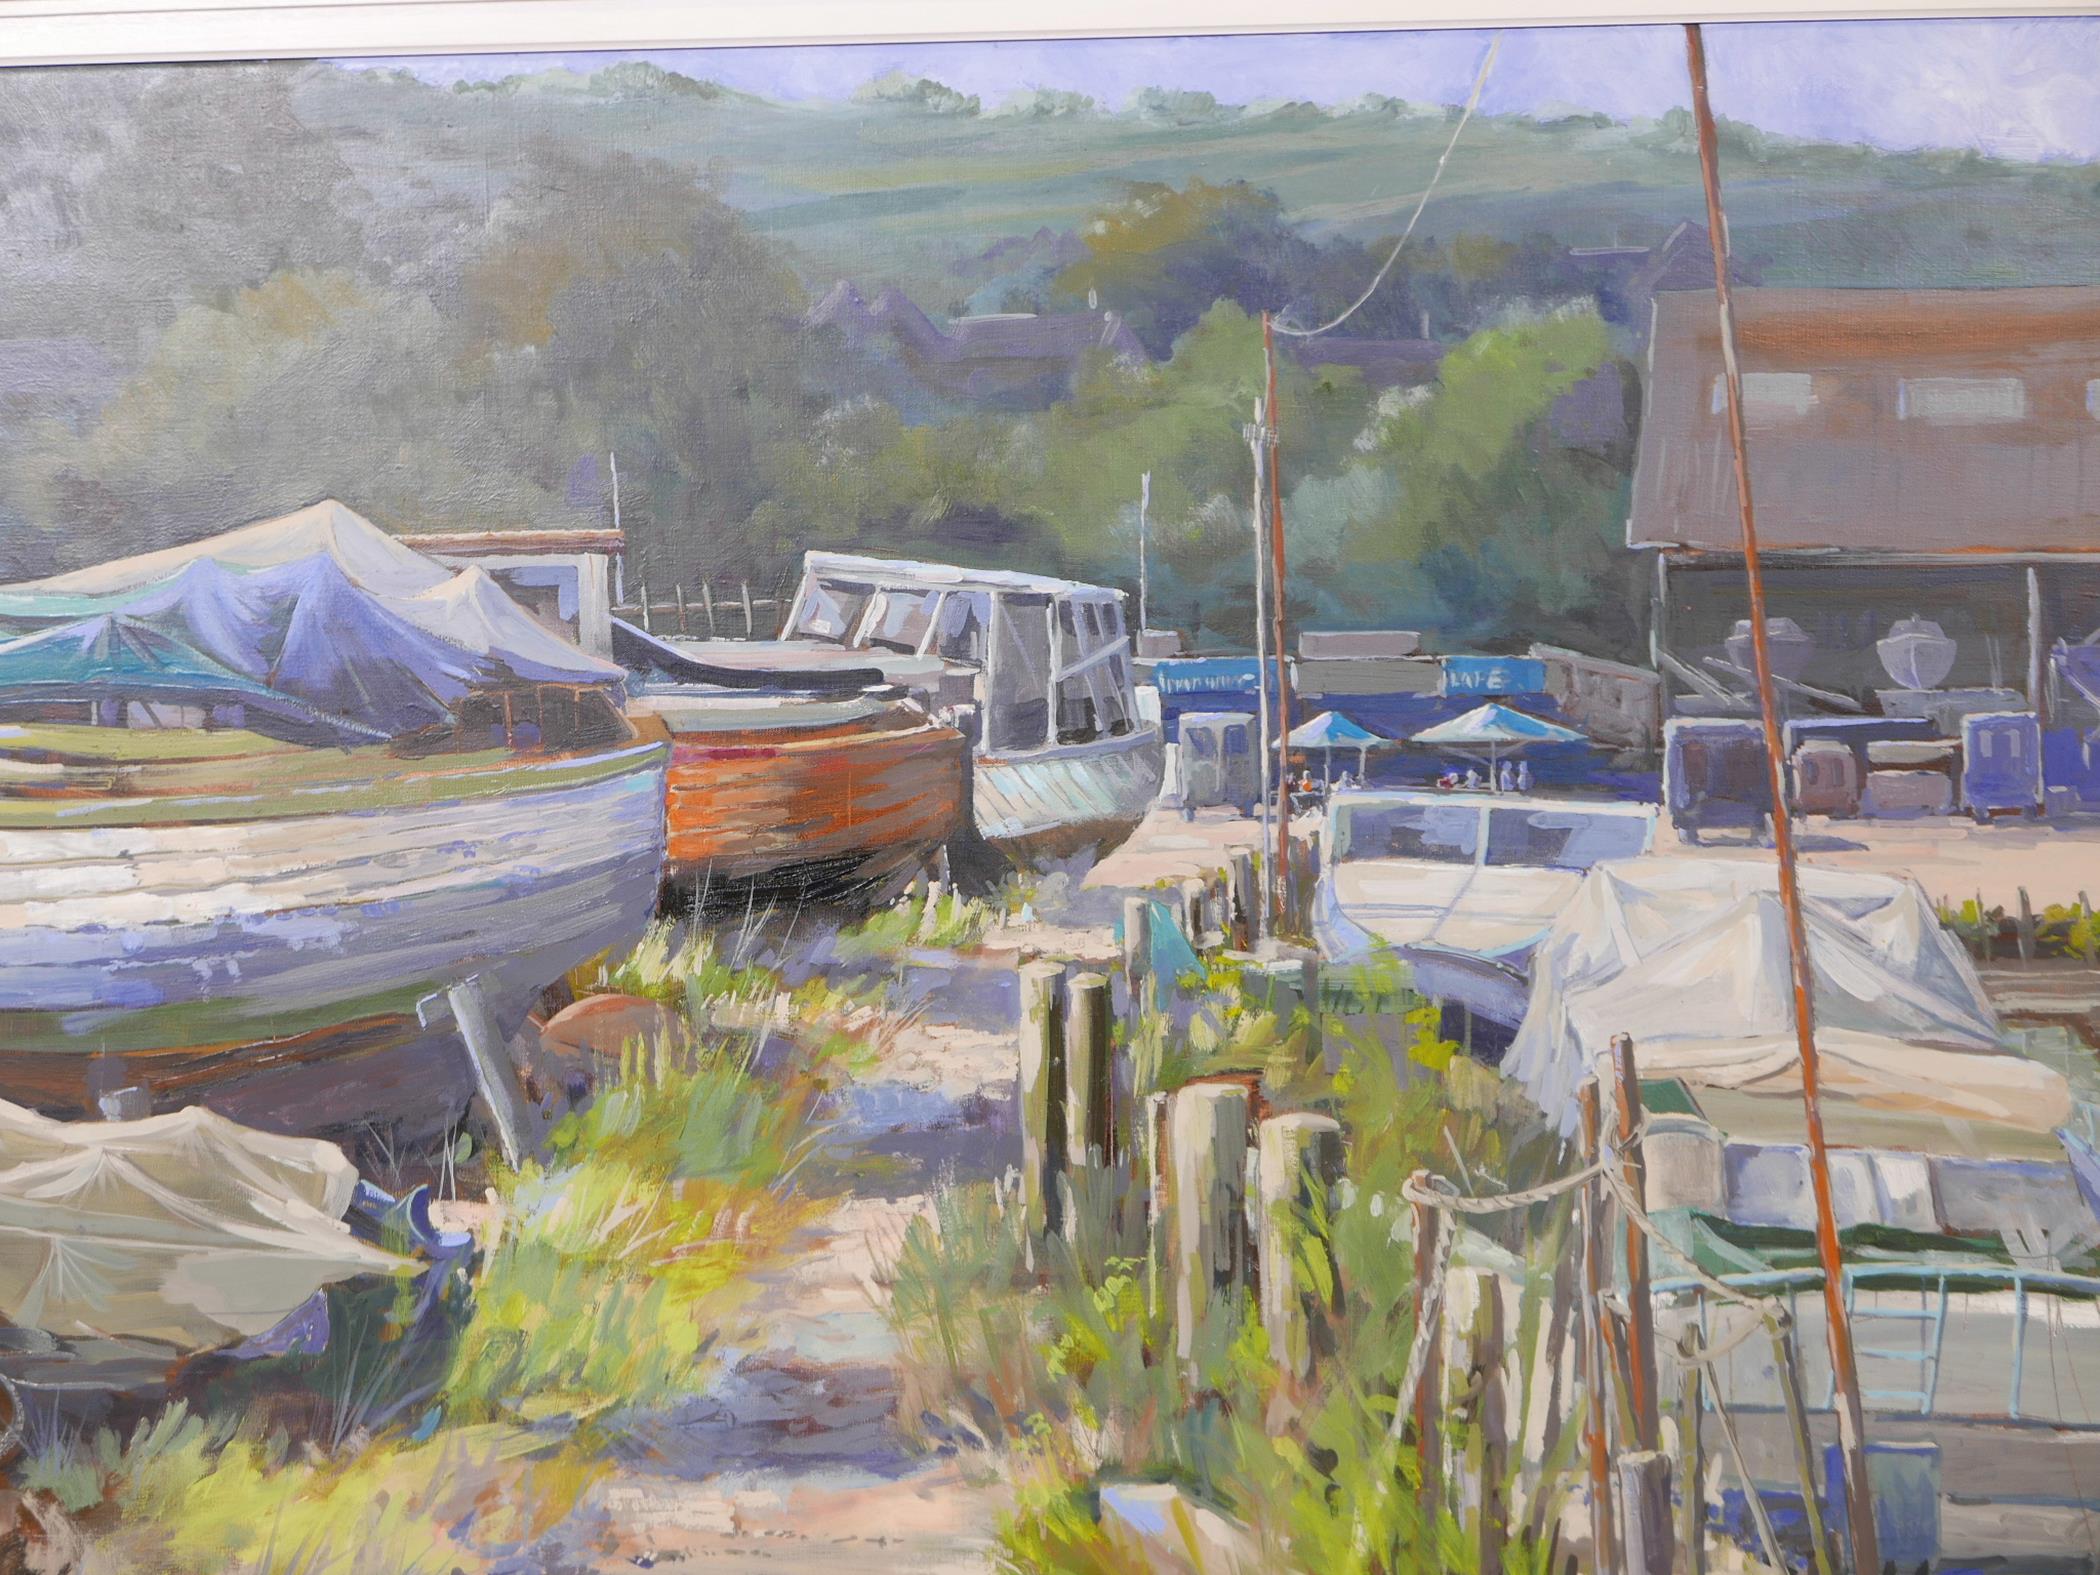 Anthony Lawman (British, b.1943), 'Boats in the Marina', signed lower left, oil on canvas, 30" x 40"